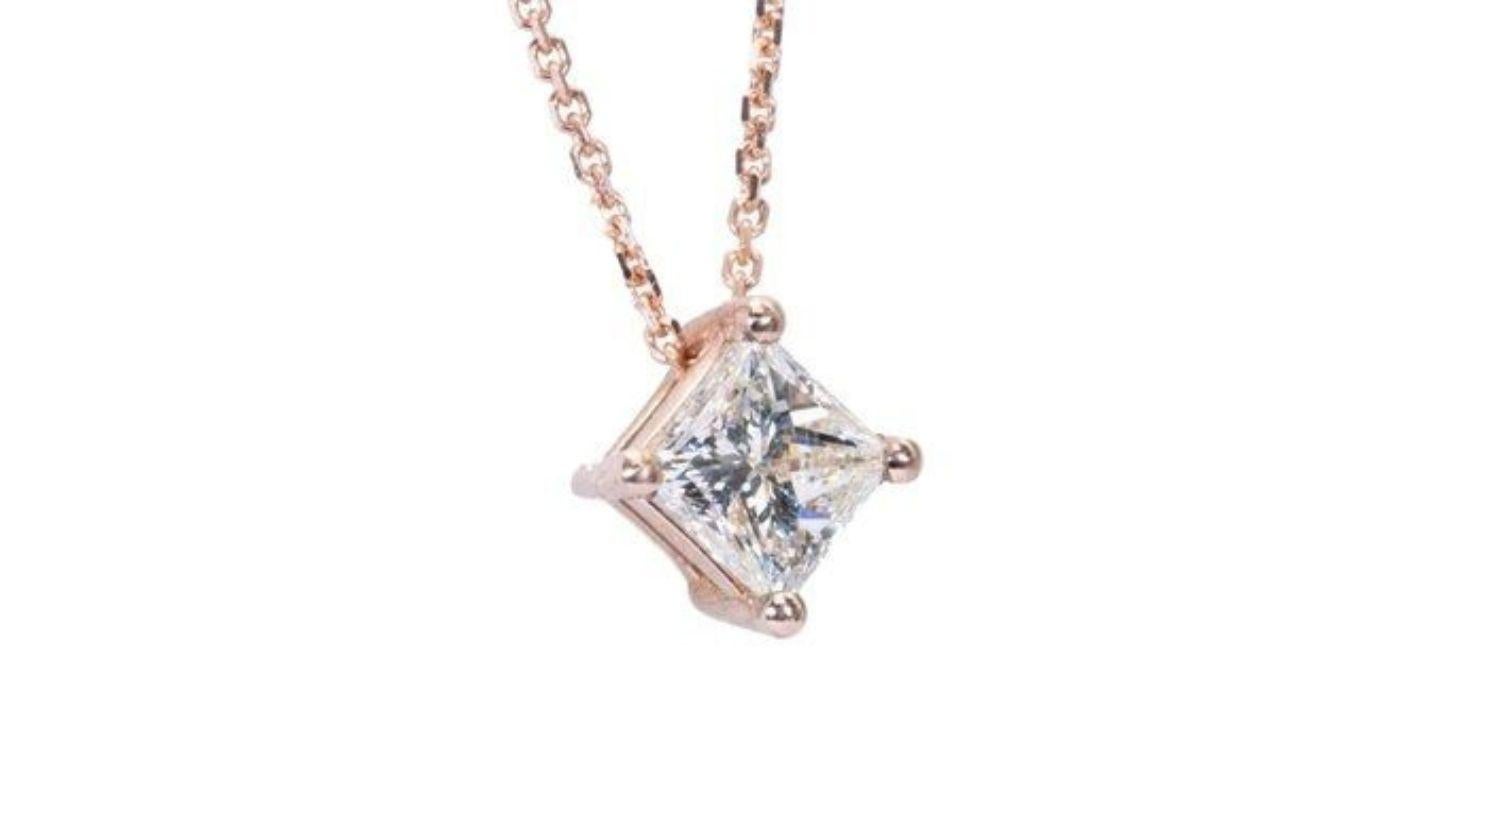 This captivating necklace showcases a dazzling 0.91 carat princess cut diamond, poised to steal the spotlight and become your new forever favorite. The precise facets of the princess cut dance with light, creating a mesmerizing kaleidoscope of